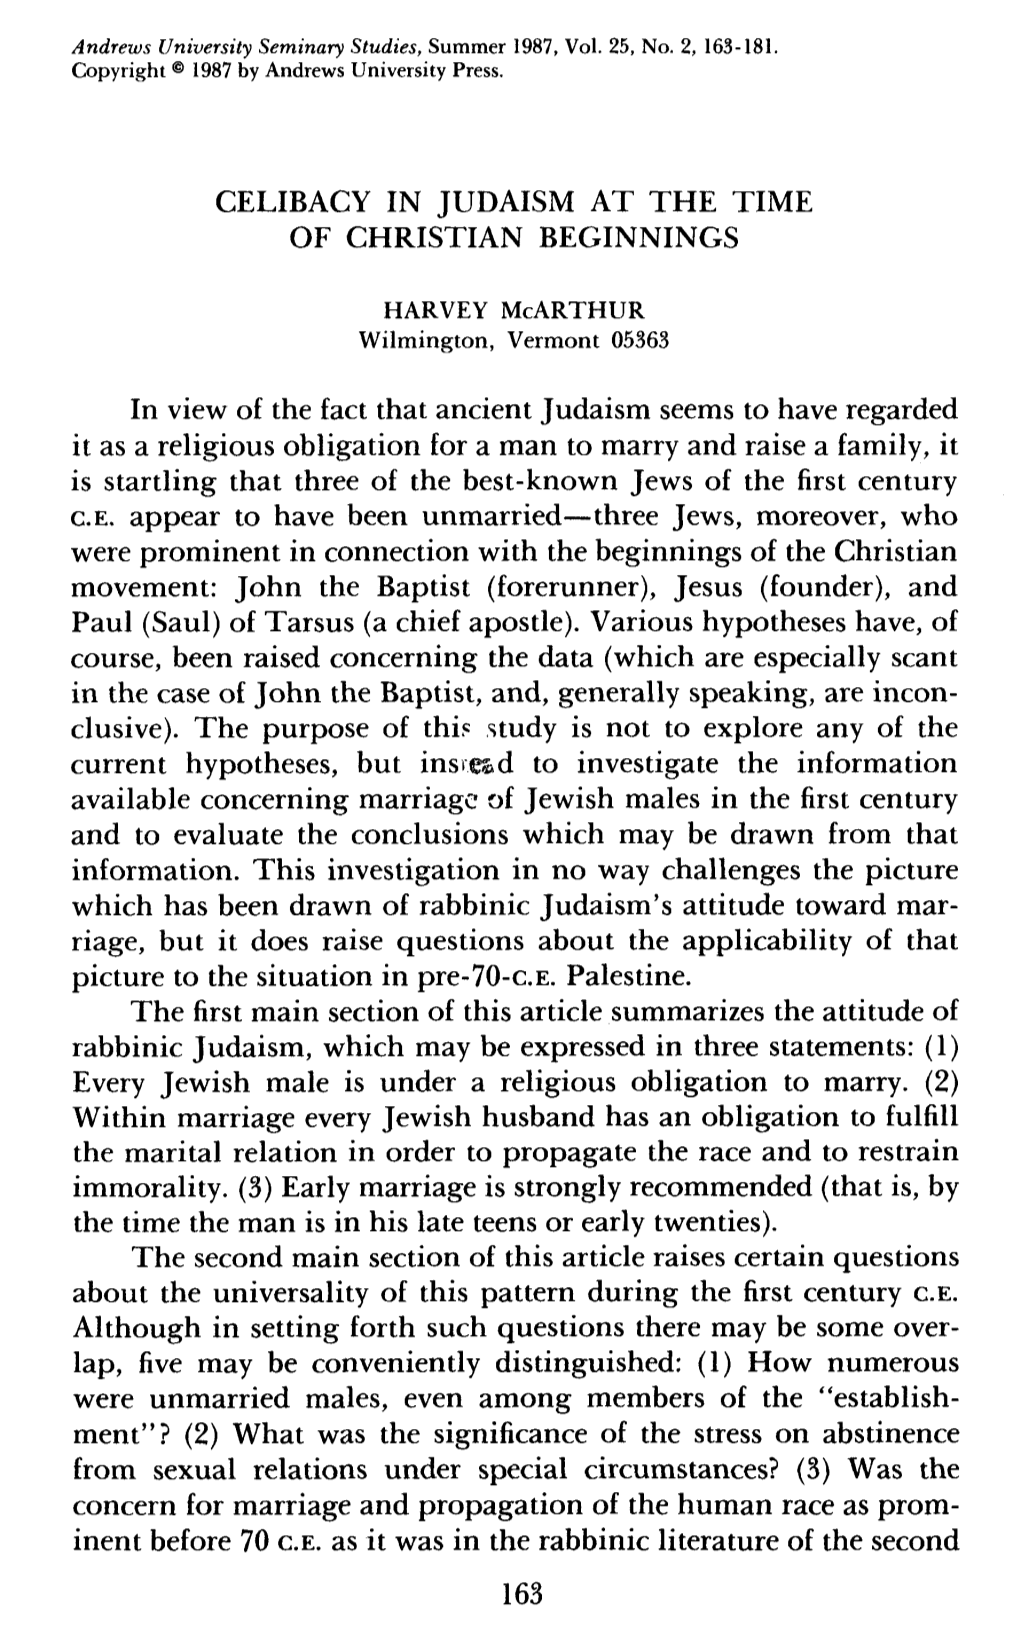 Celibacy in Judaism at the Time of Christian Beginnings